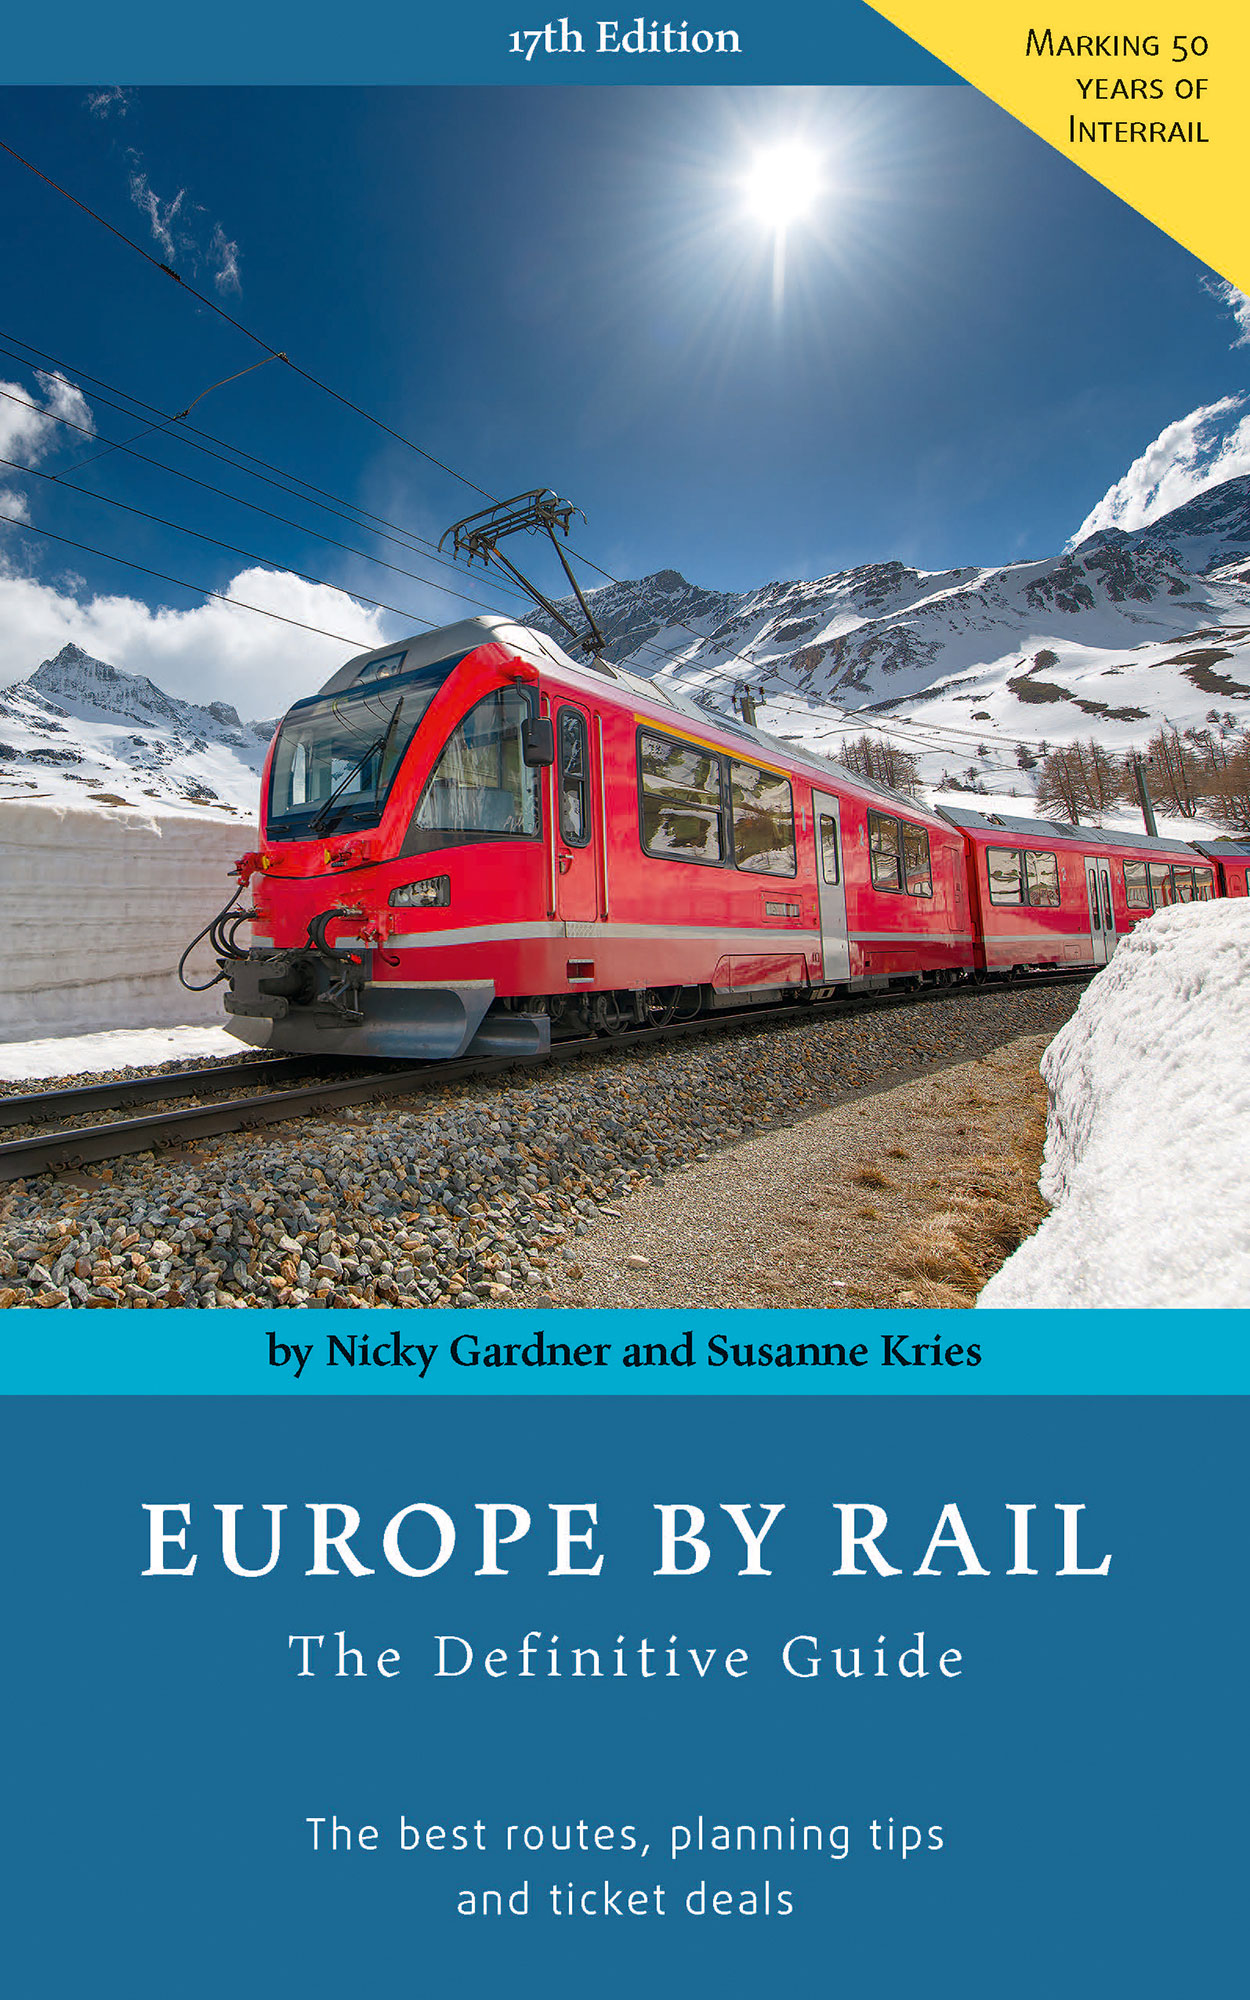 17th edition Europe by Rail